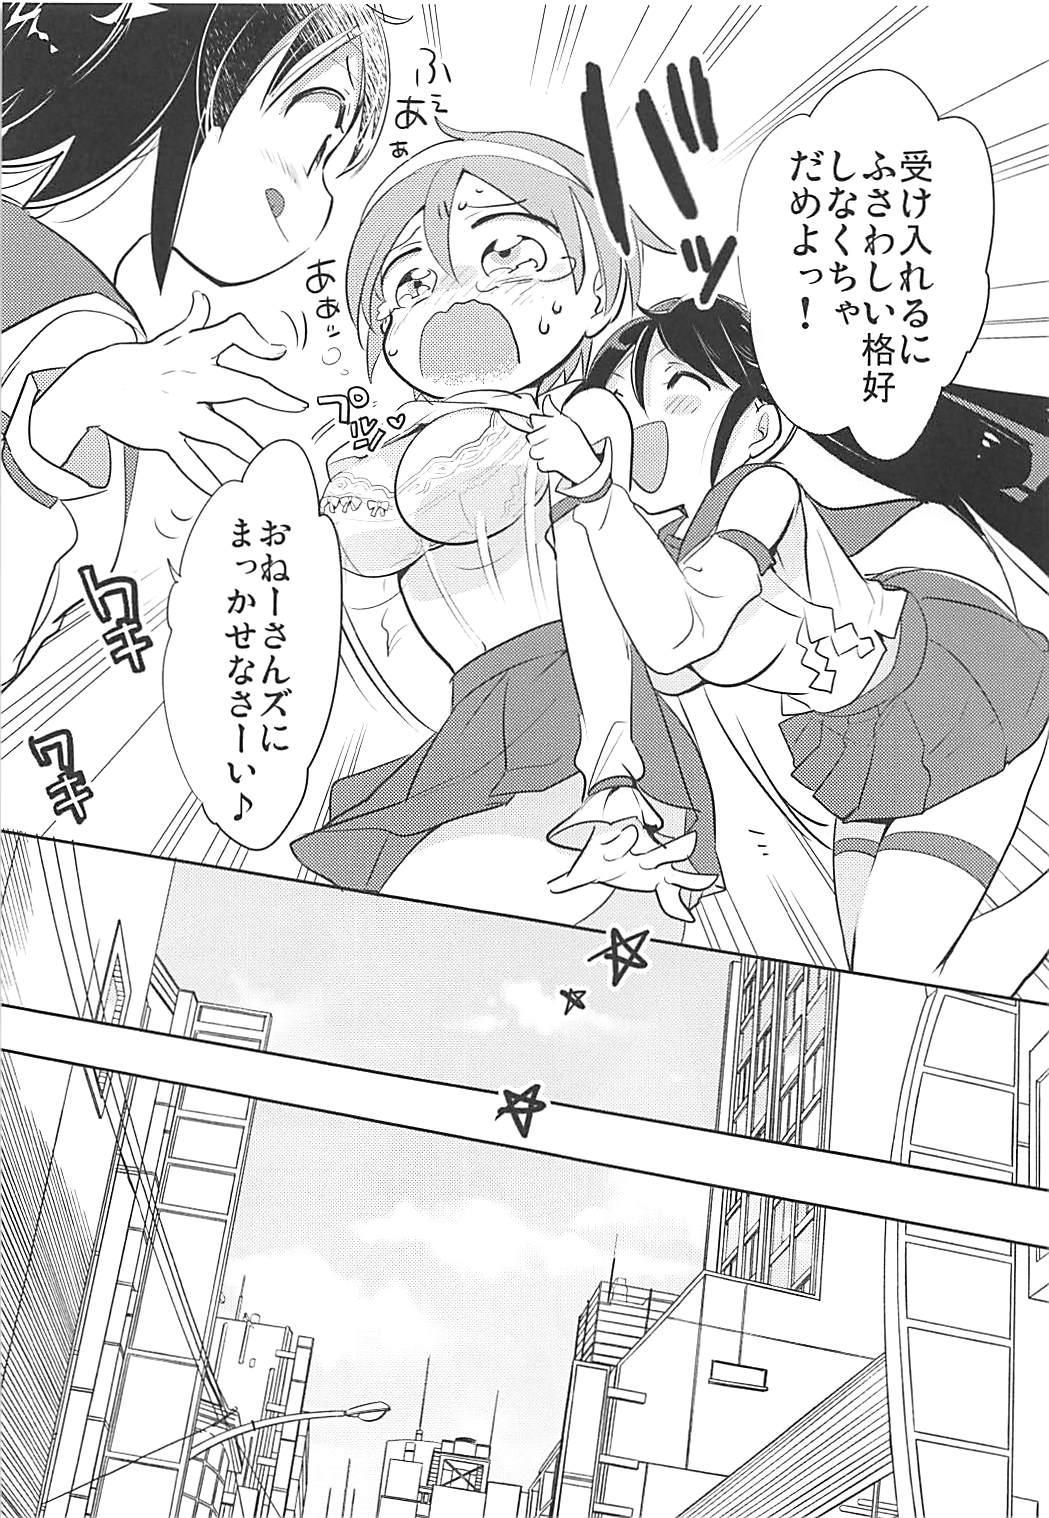 Caught Kancollation EX 4 - Kantai collection Candid - Page 10